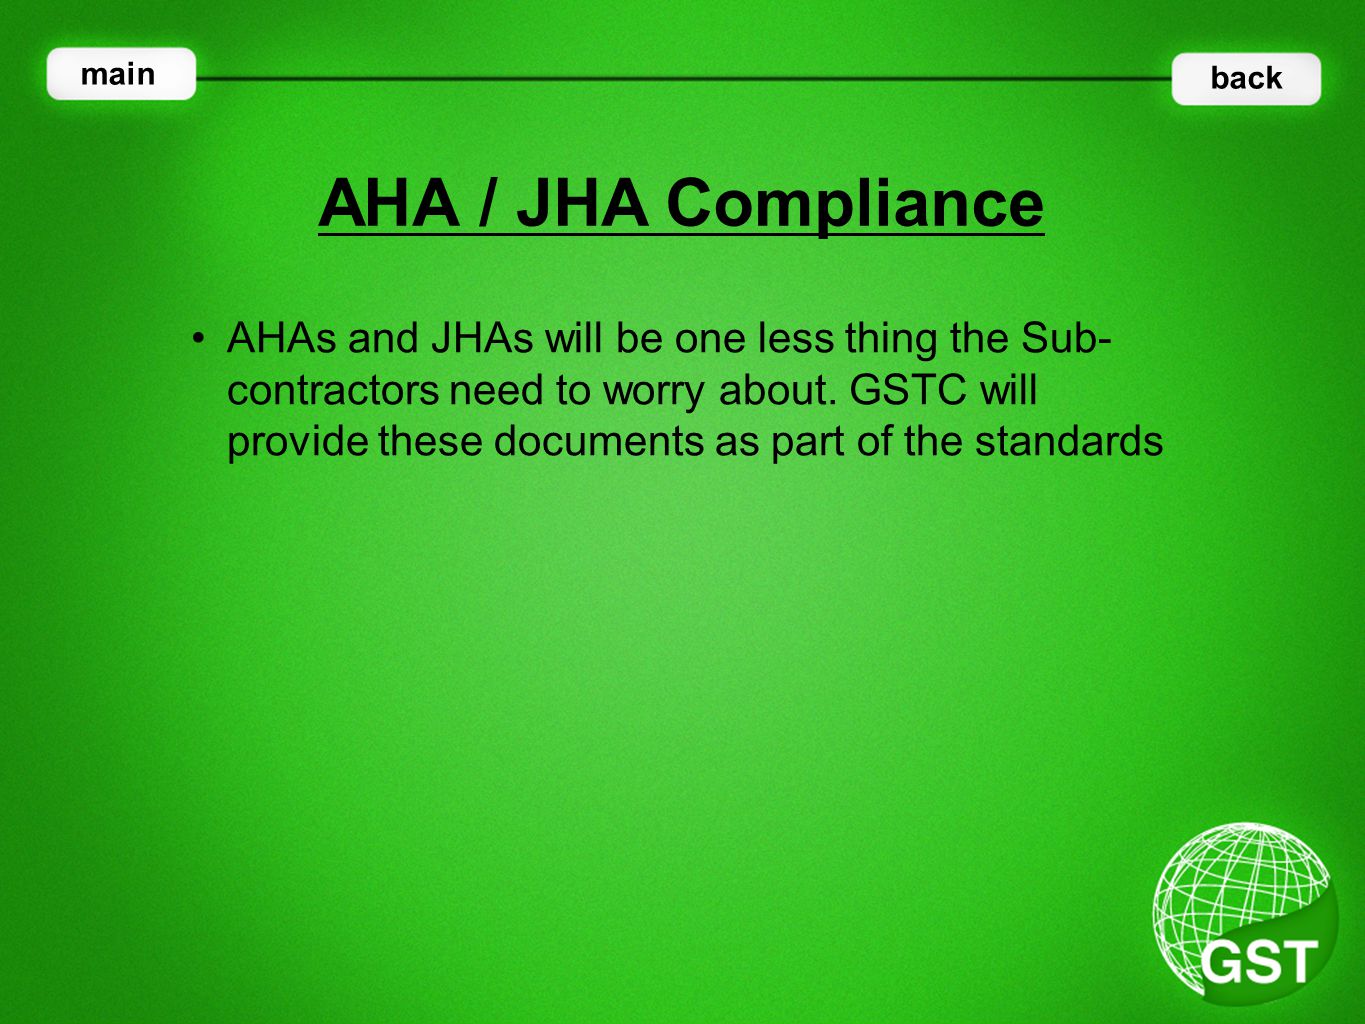 AHAs and JHAs will be one less thing the Sub- contractors need to worry about.